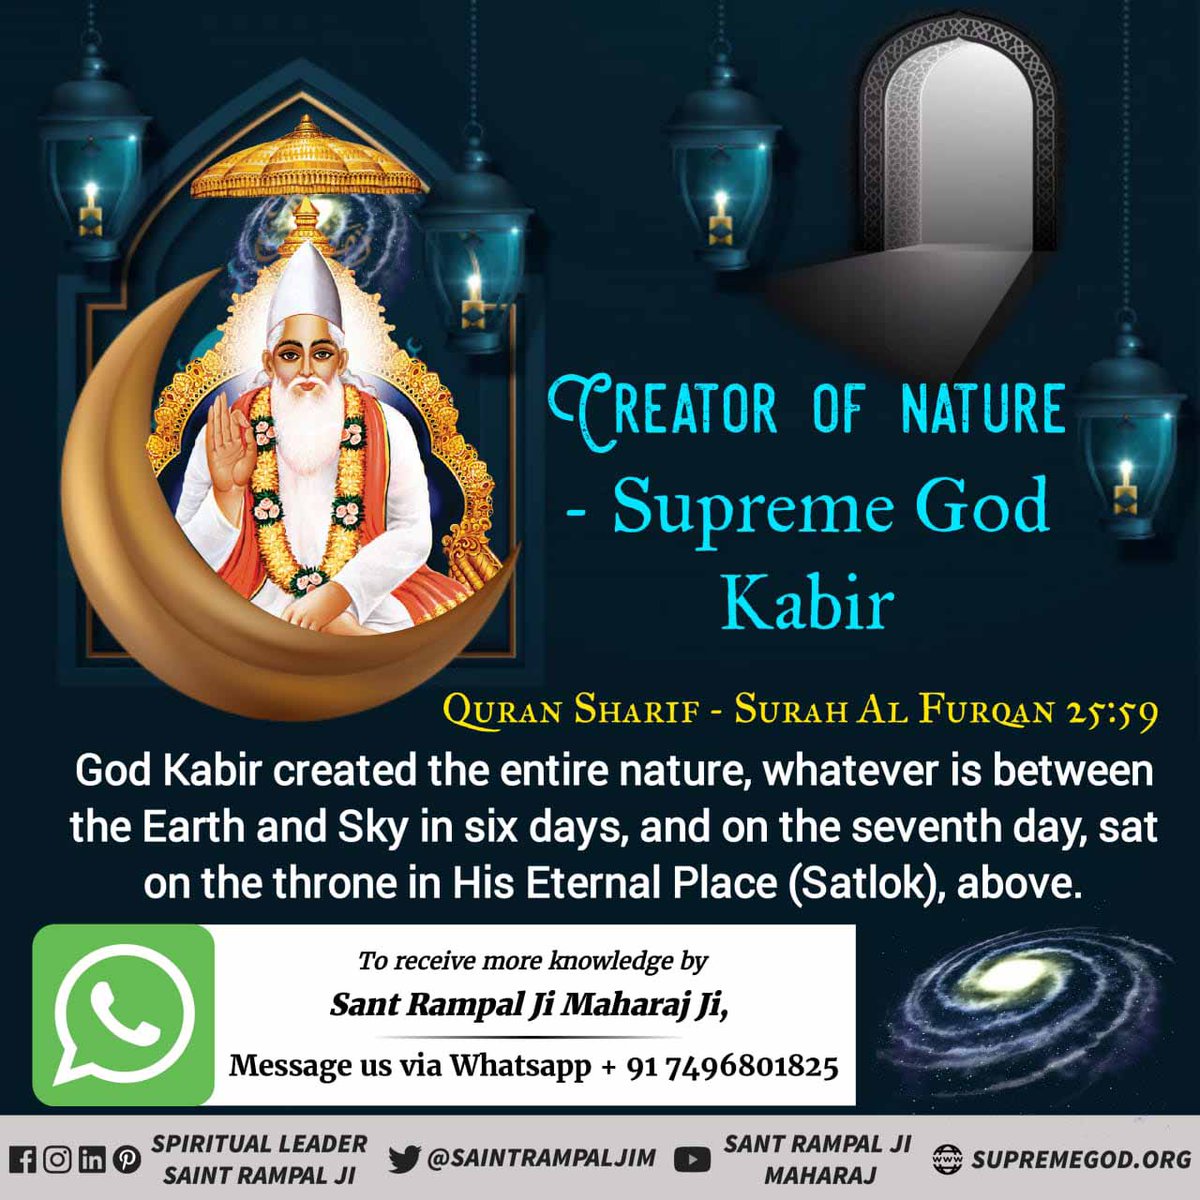 #GodMorningWednesday
CREATOR OF NATURE
~ SUPREME GOD KABIR
QURAN SHARIF - SURAH AL FURQAN 25:59
God Kabir created the entire nature, whatever is between the Earth and sky in six days, and on the seventh day, sat on the throne in Eternal peace (Satlok) abode.
#wednesdaythought